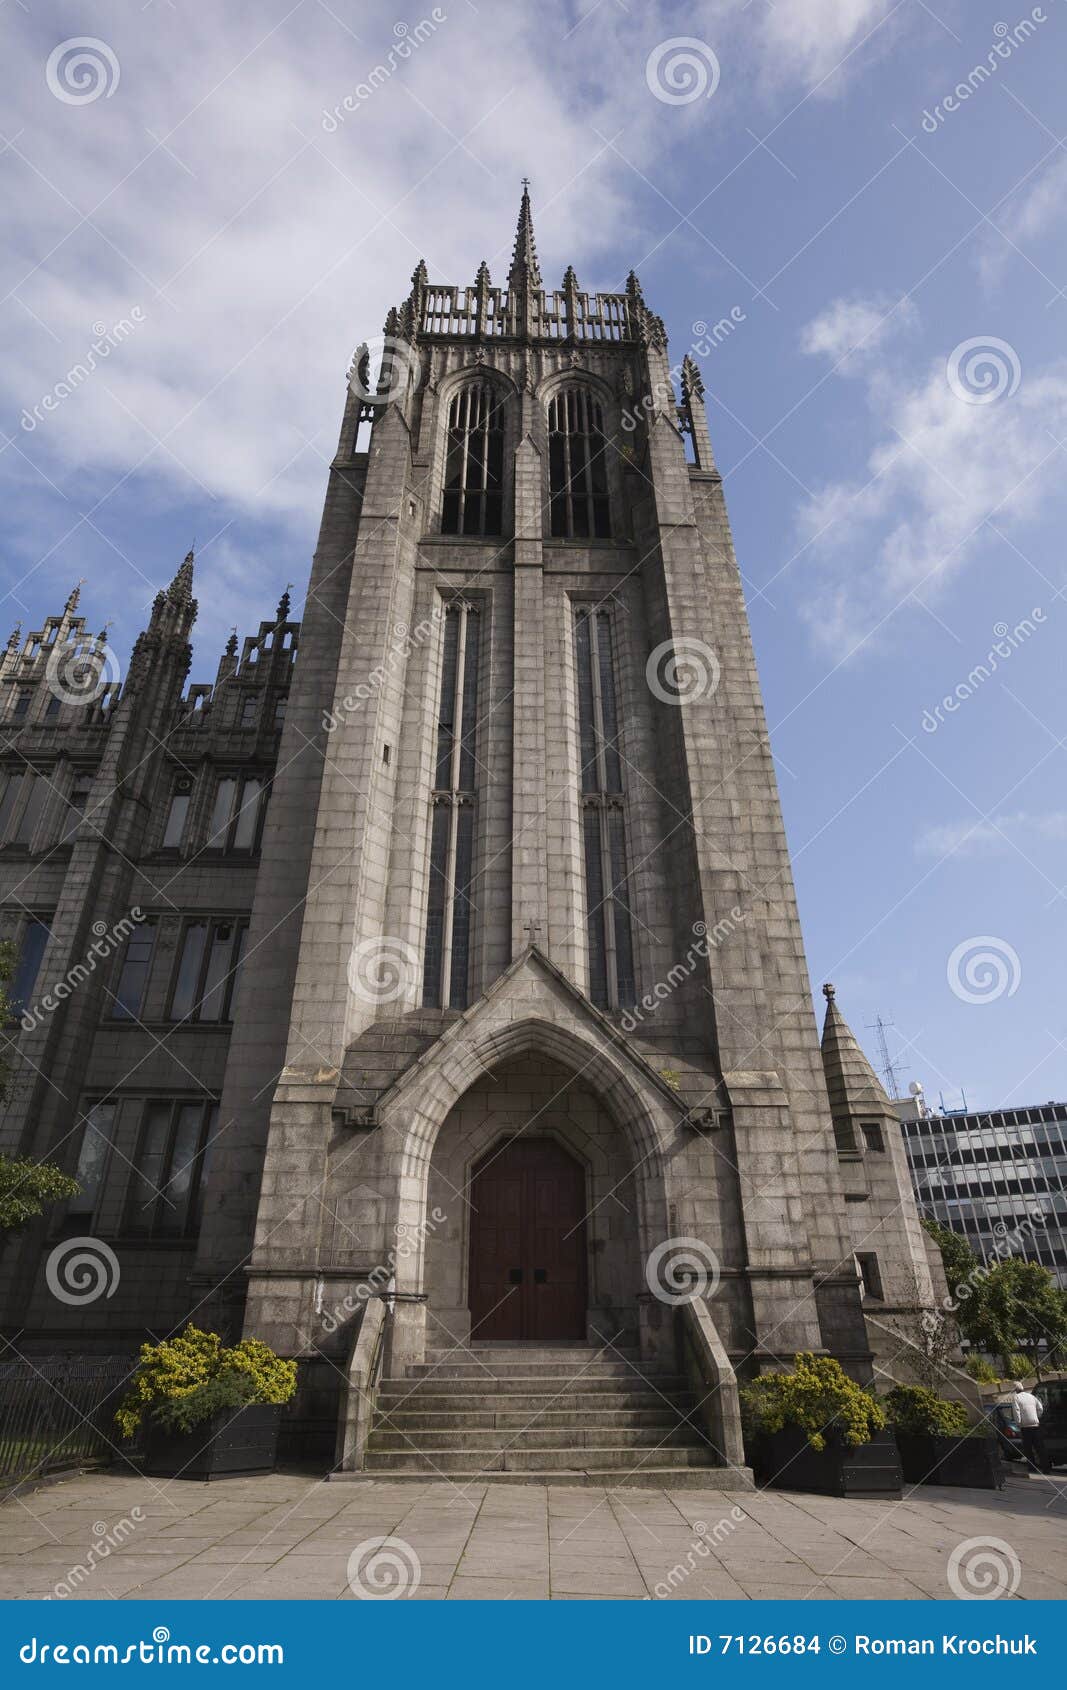 the spire of marshall college, aberdeen, uk